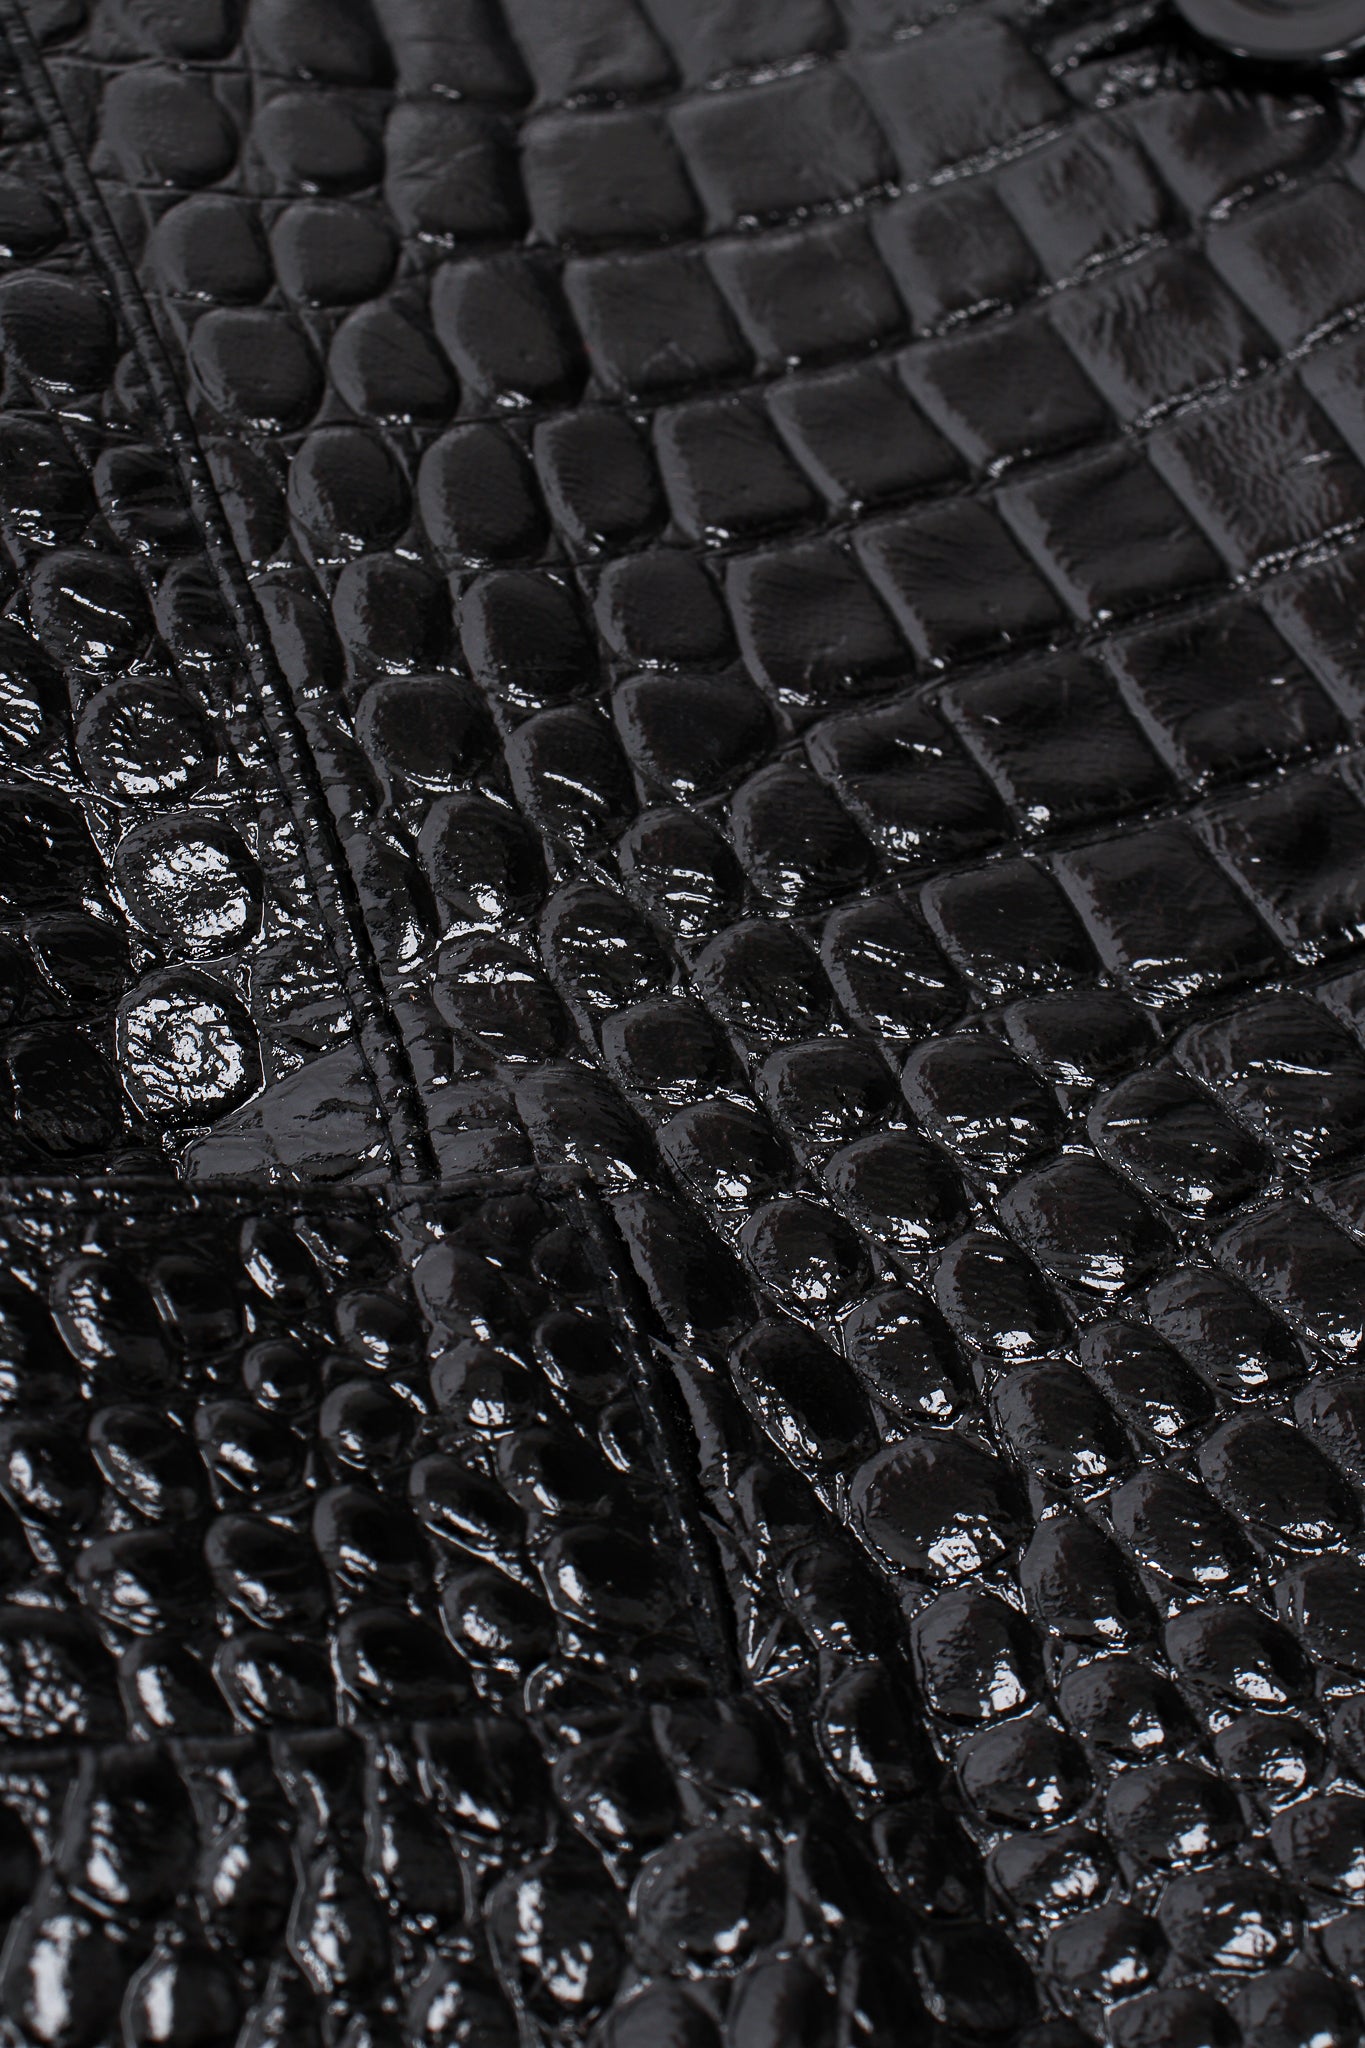 Vintage Escada Patent Leather Embossed Gator Jacket fabric texture at Recess Los Angeles